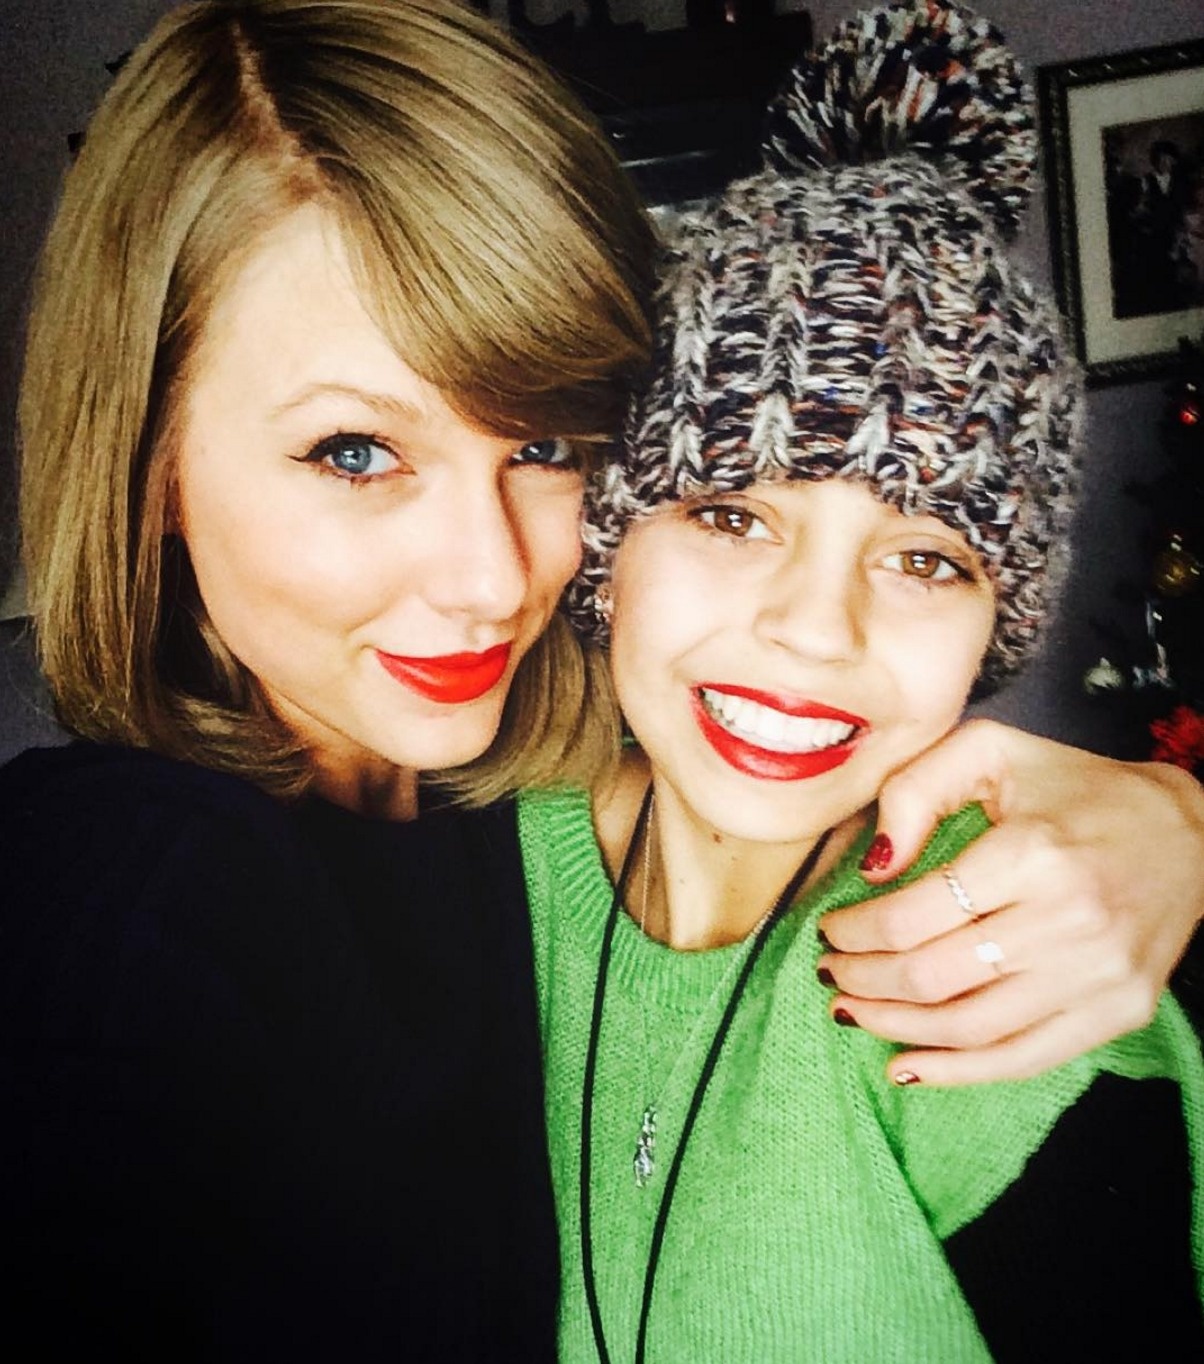 After one cancer patient used social media to discuss her love for Taylor Swift, the pop star visited the girl over Christmas.